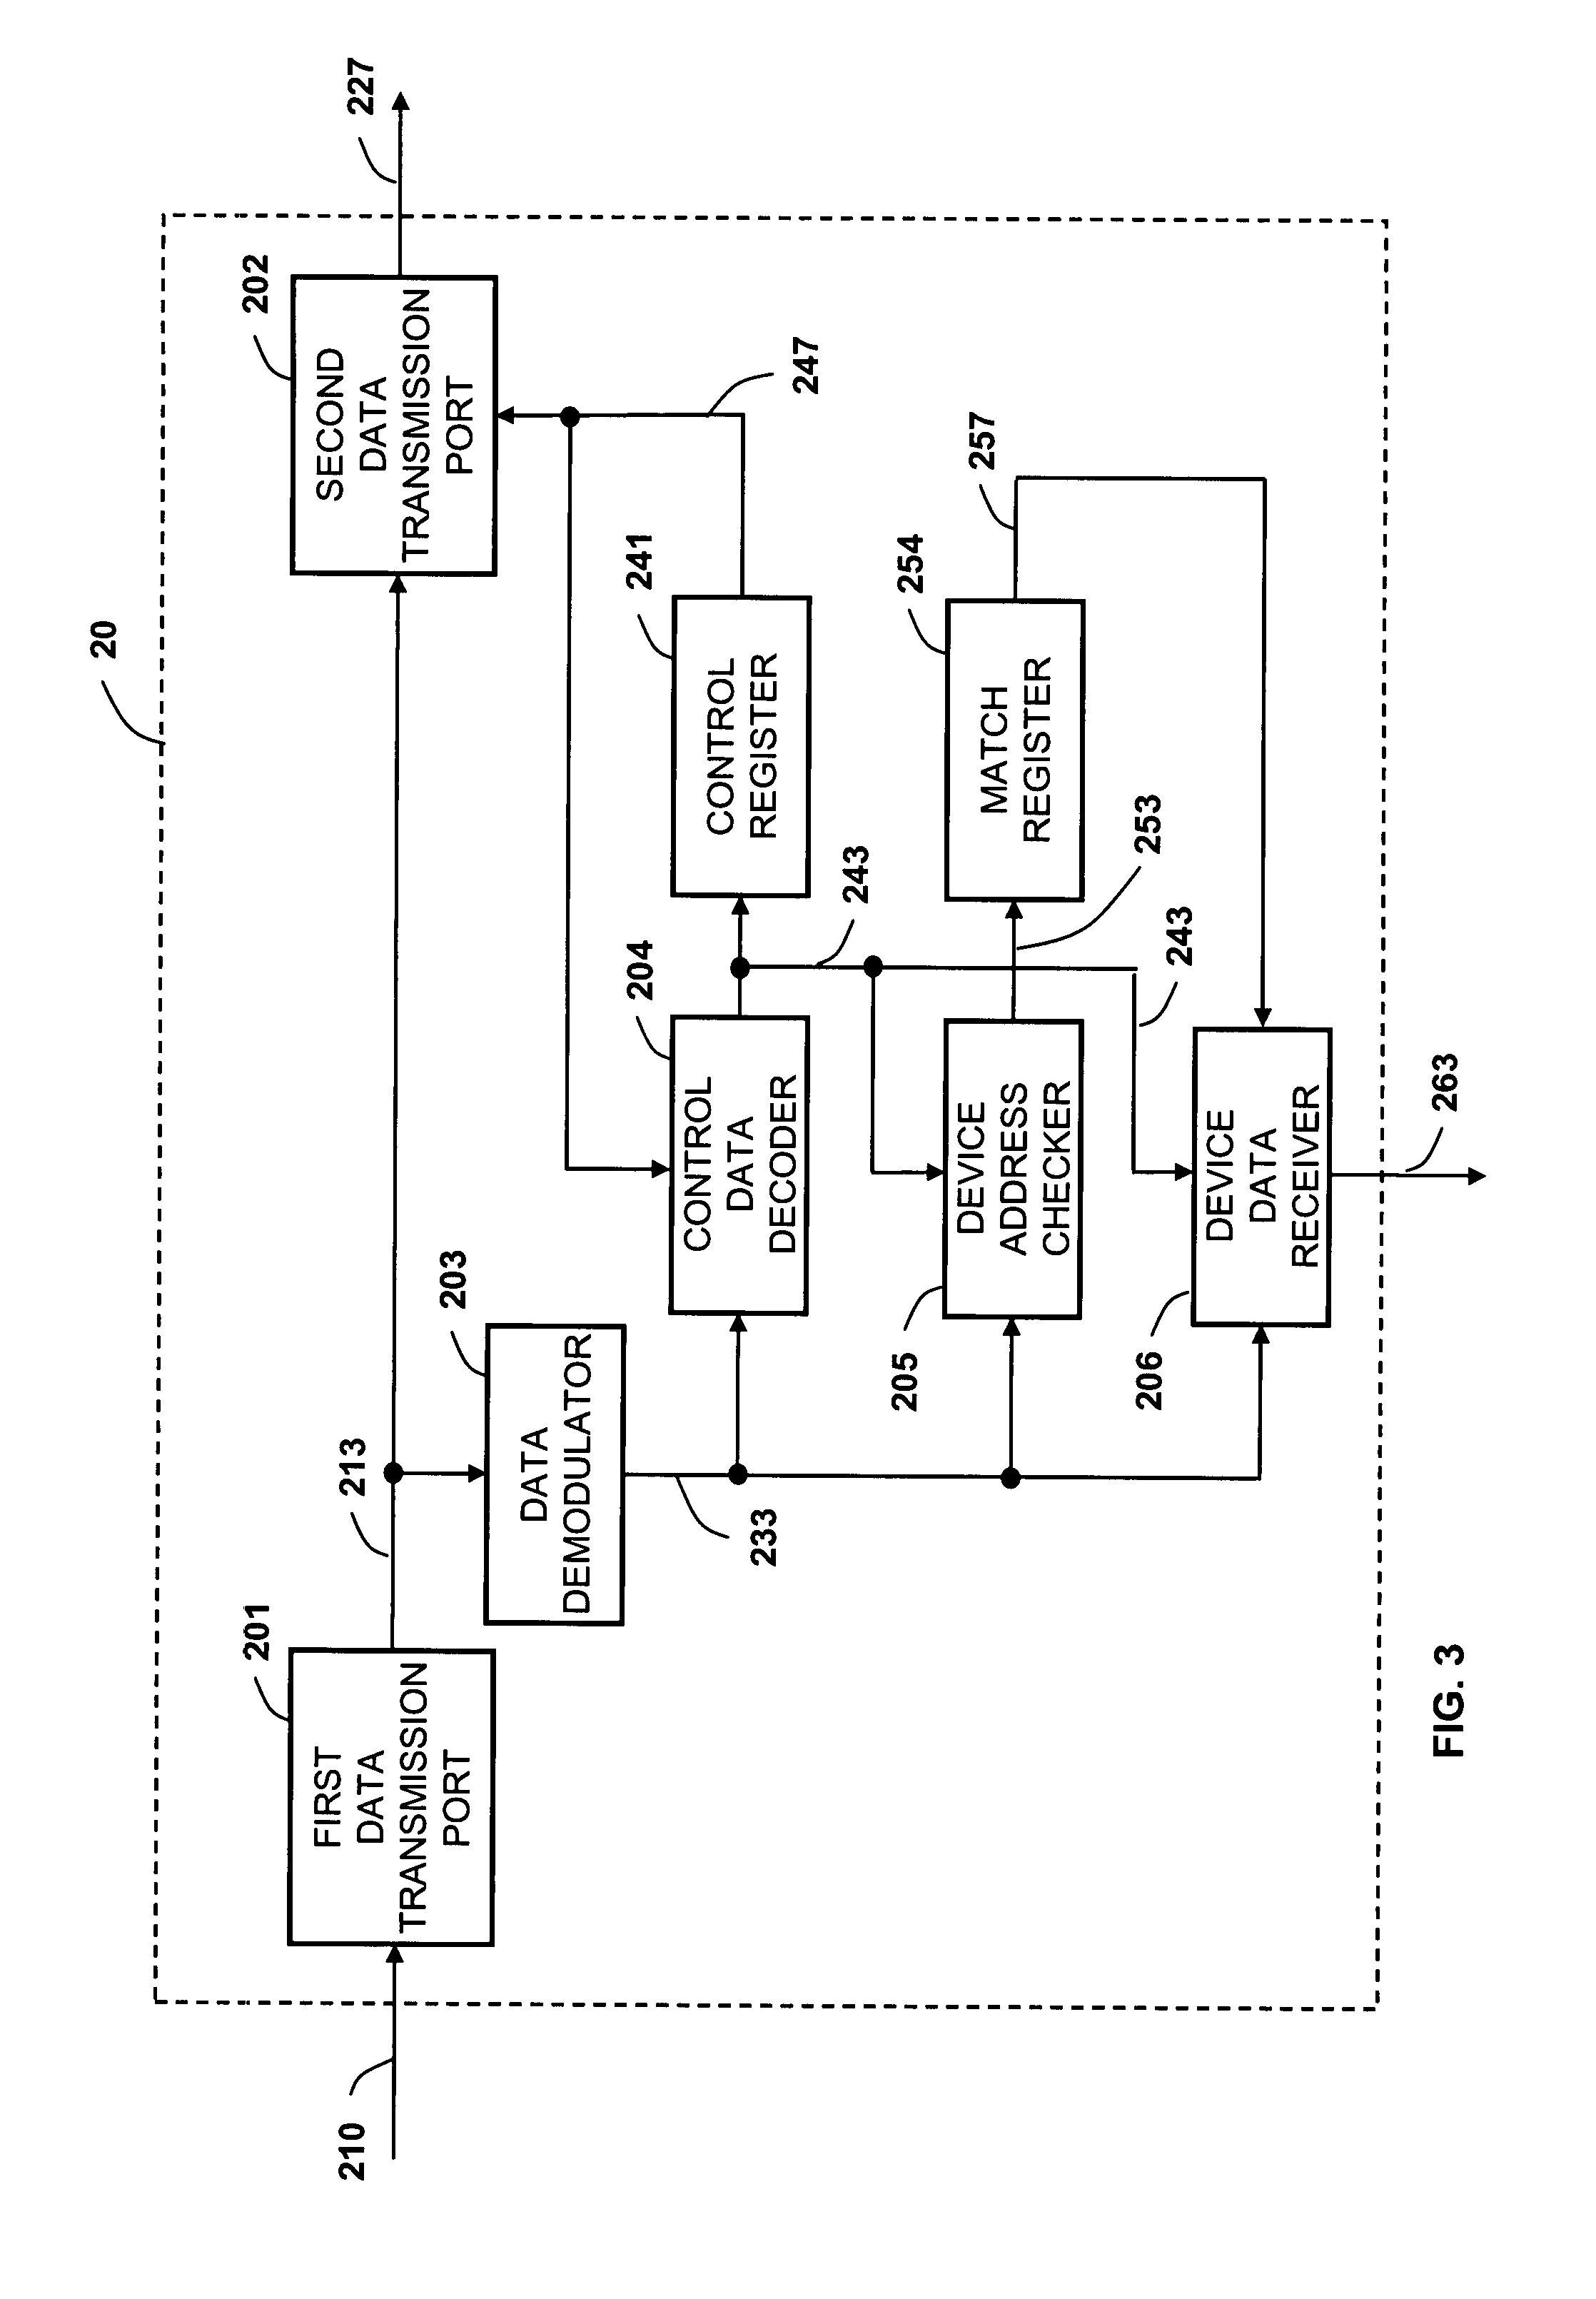 Serial bus device with address assignment by master device